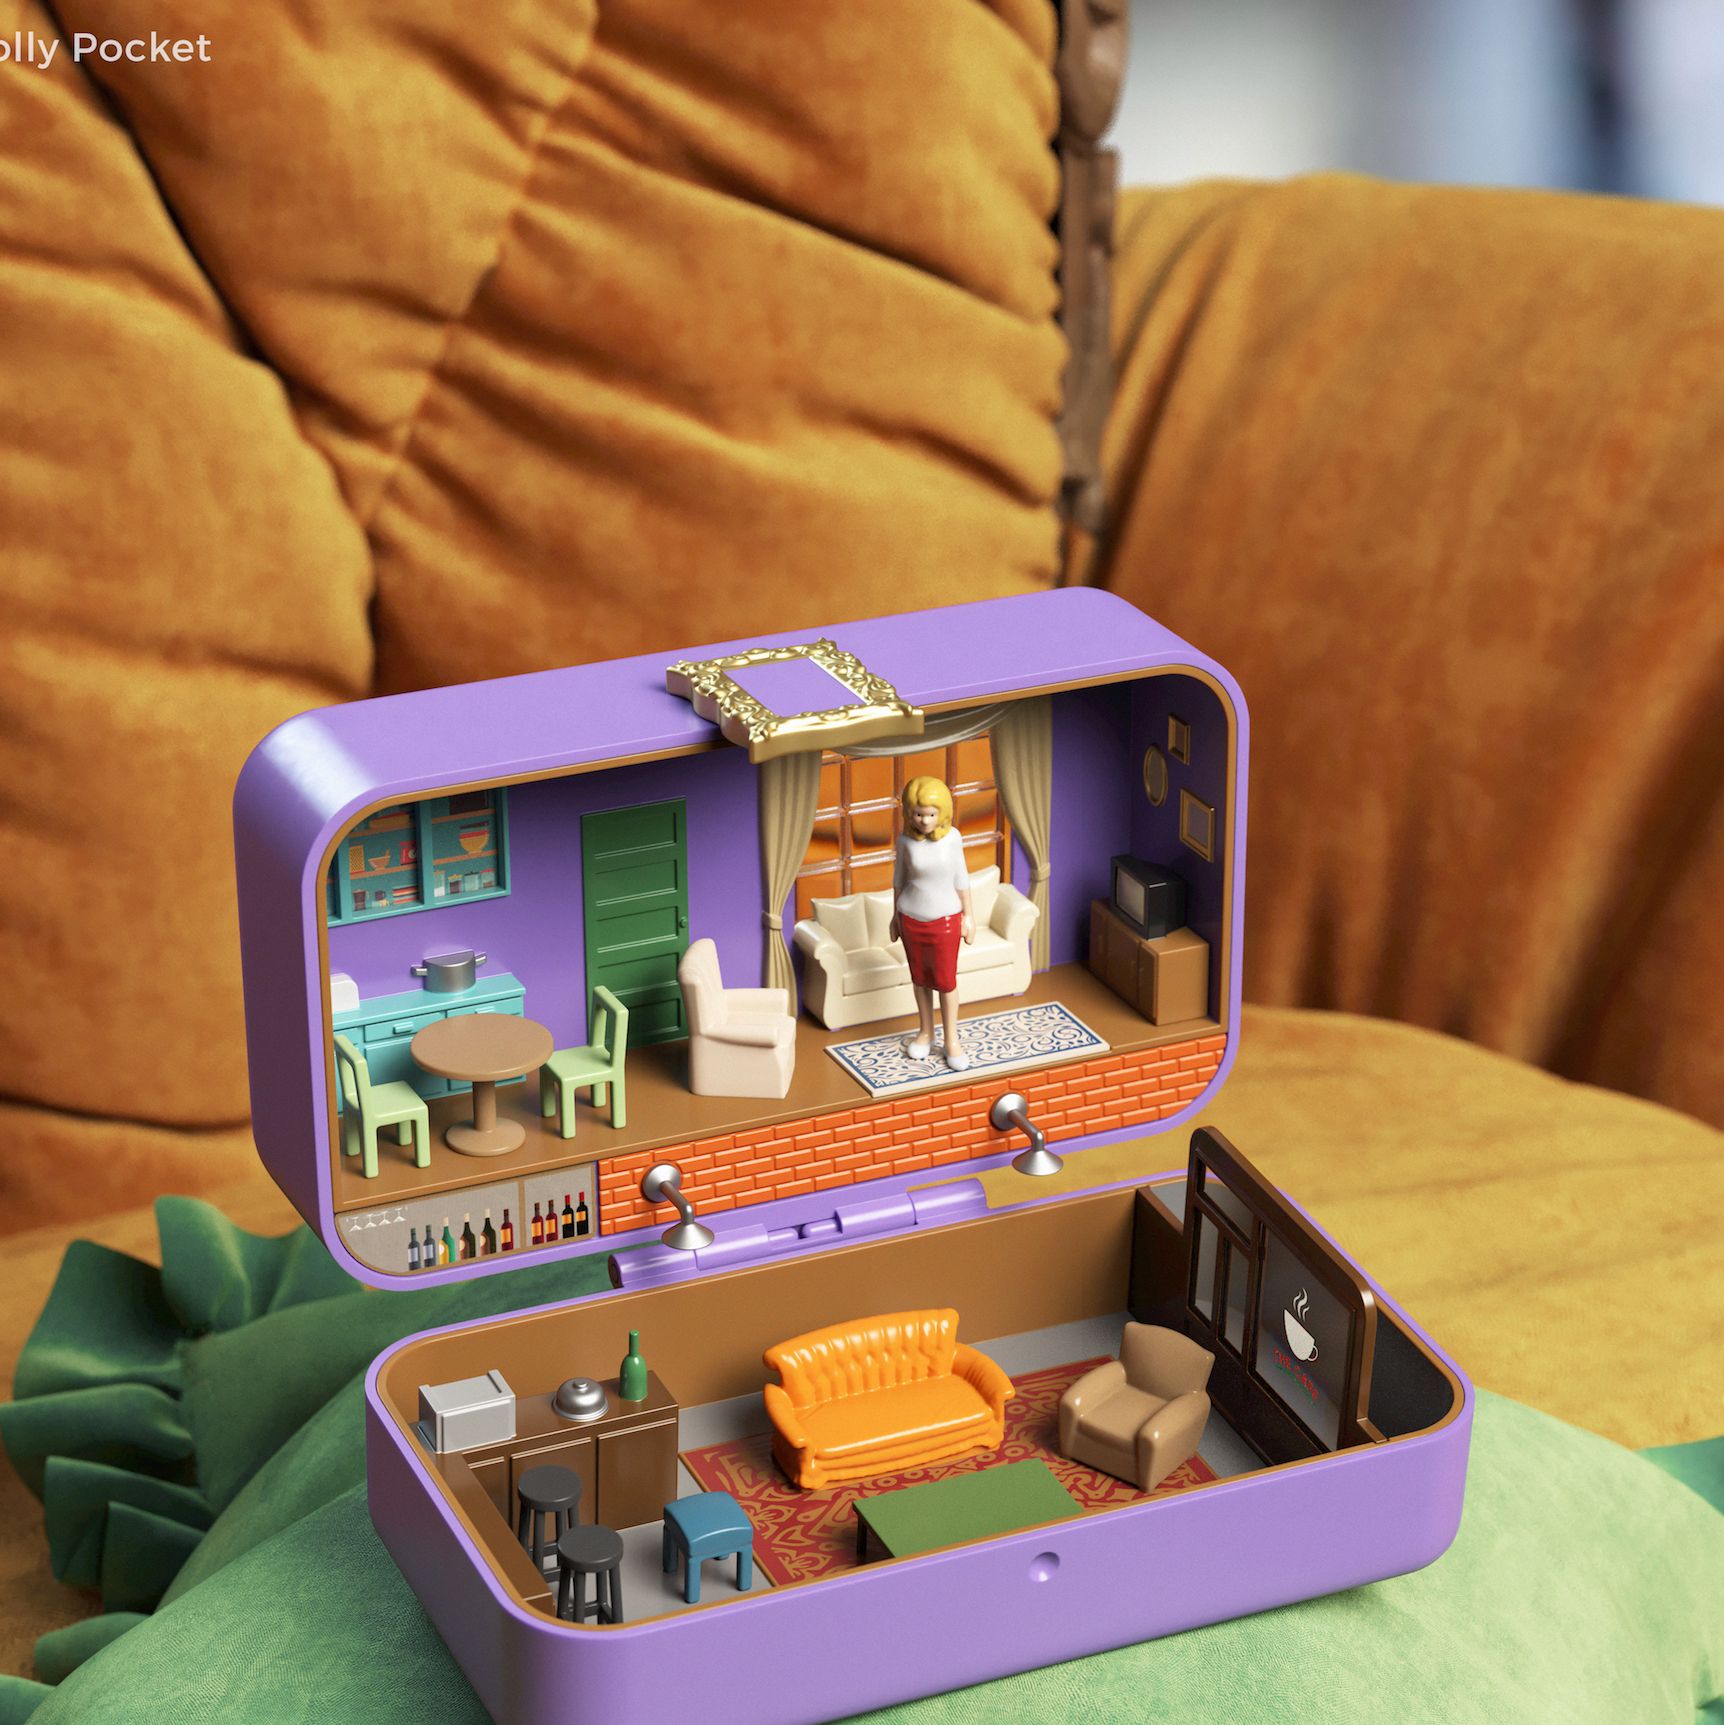 These Famous TV Homes Have Been Given a Polly Pocket Makeover